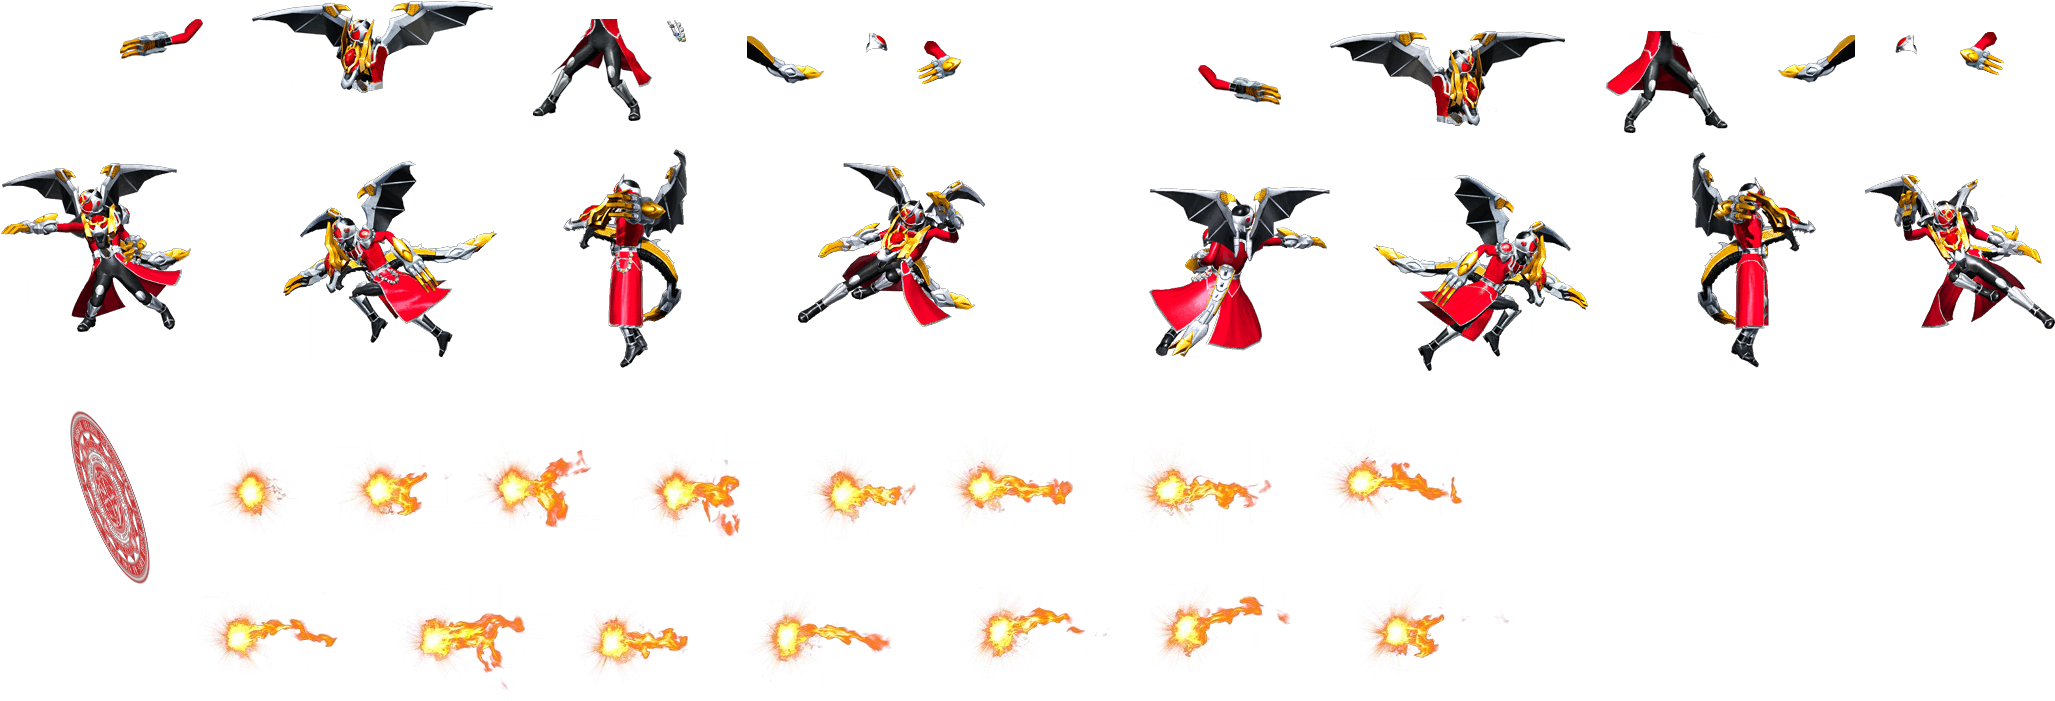 Click For Full Sized Image Kamen Rider Wizard All Dragon - Kamen Rider Sprite (2184x788), Png Download